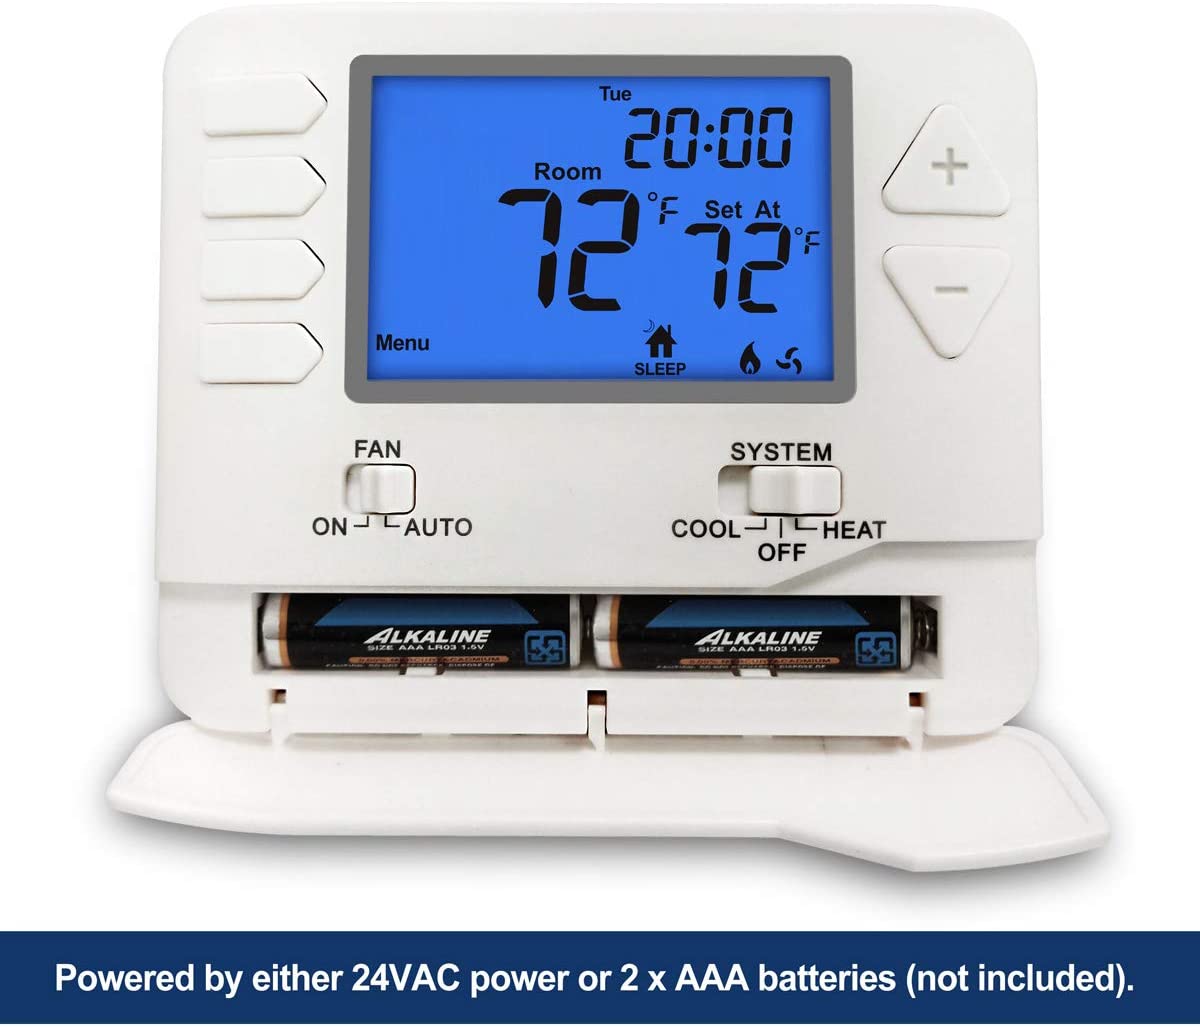 ELECTECK Thermostat, 5-1-1 Day Programmable, Large Digital LCD Display, Compatible w/Single Stage Electrical and Gas System, Up to 1 Heat/1 Cool, White